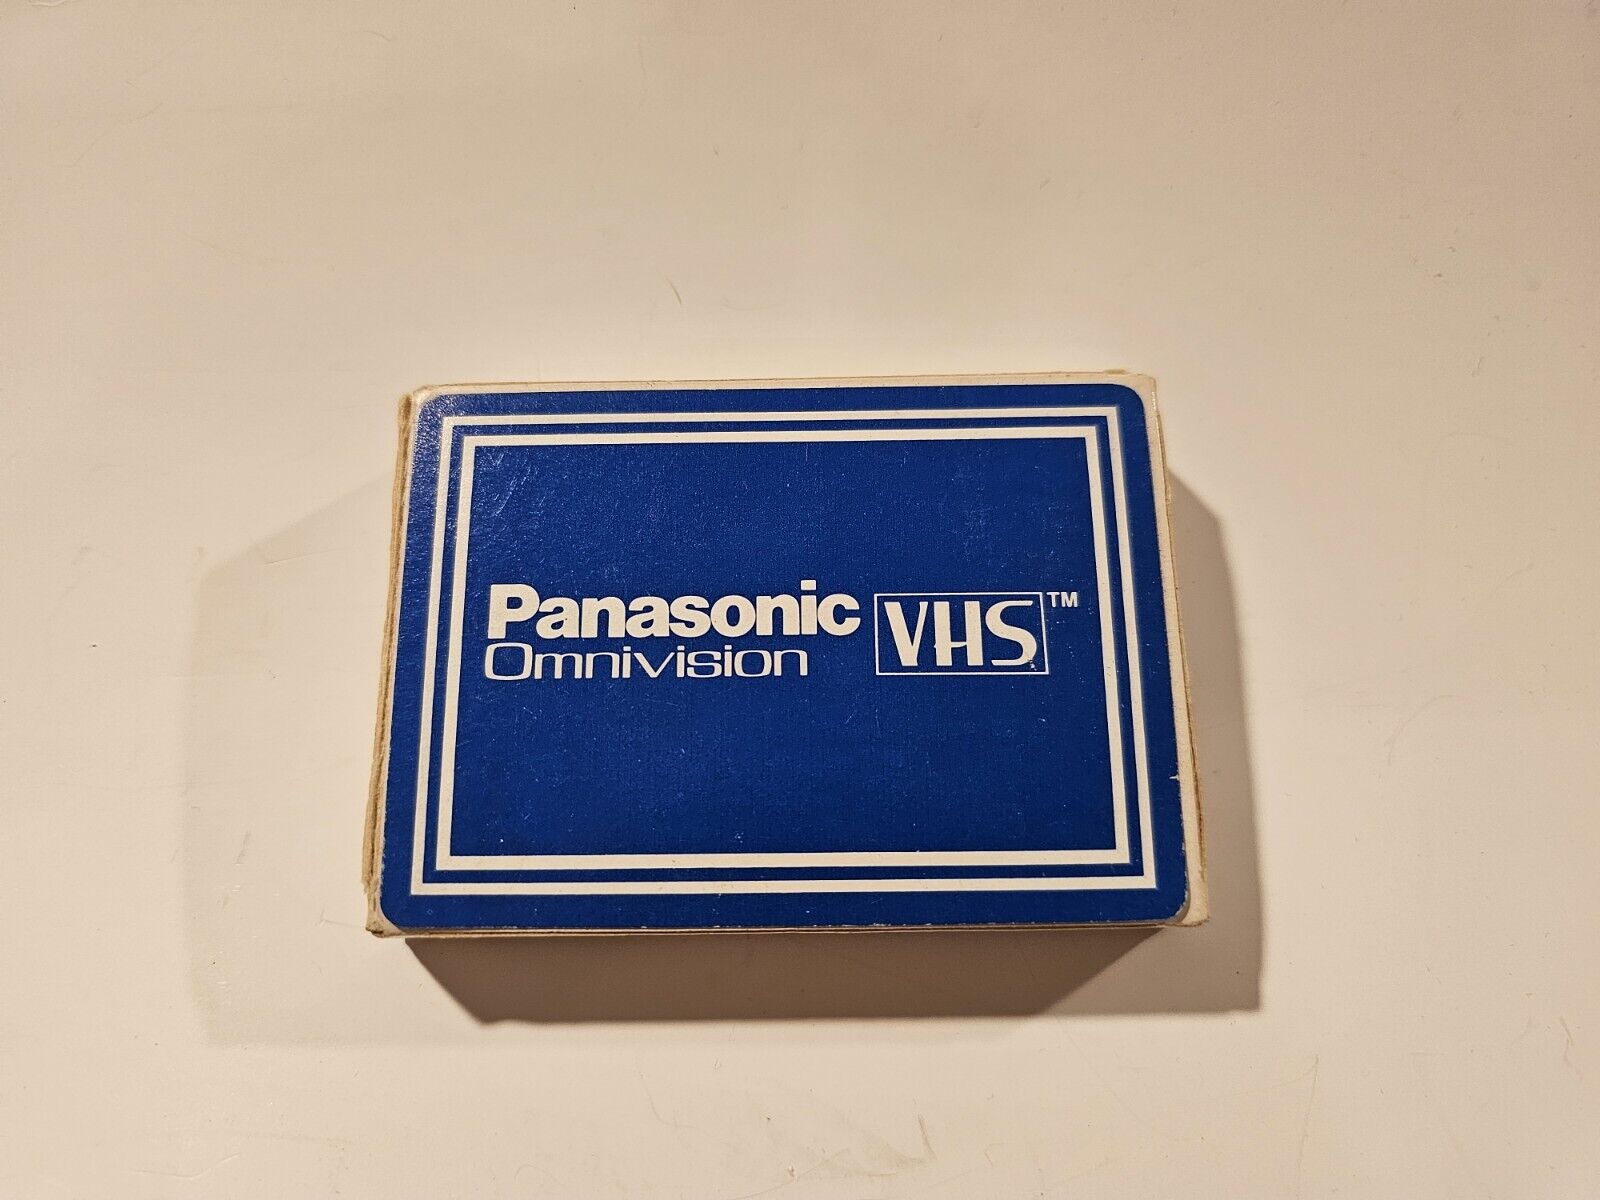 Vintage Panasonic Omnivision VHS Deck Playing Cards Sealed